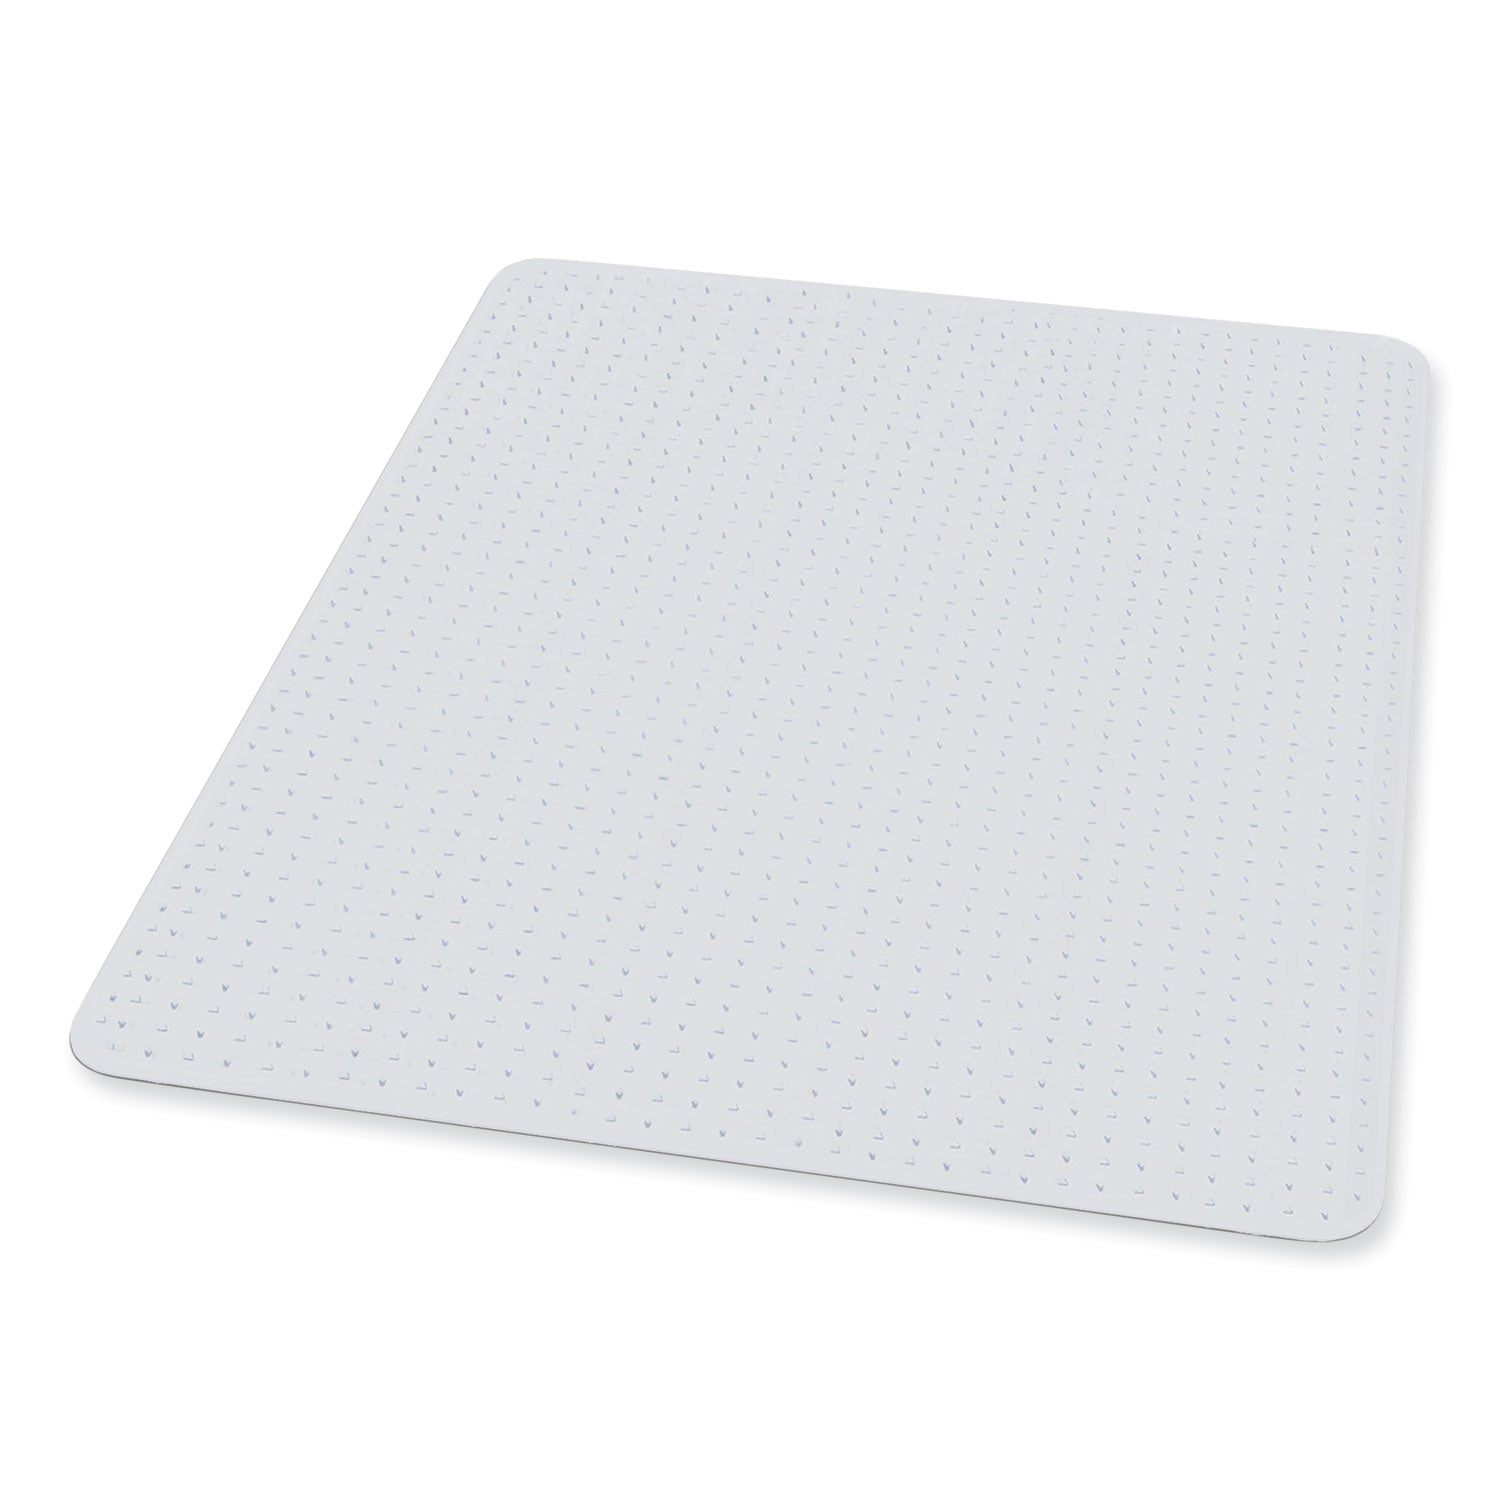 everlife-chair-mat-for-medium-pile-carpet-60-x-96-clear-ships-in-4-6-business-days_esr122881 - 1